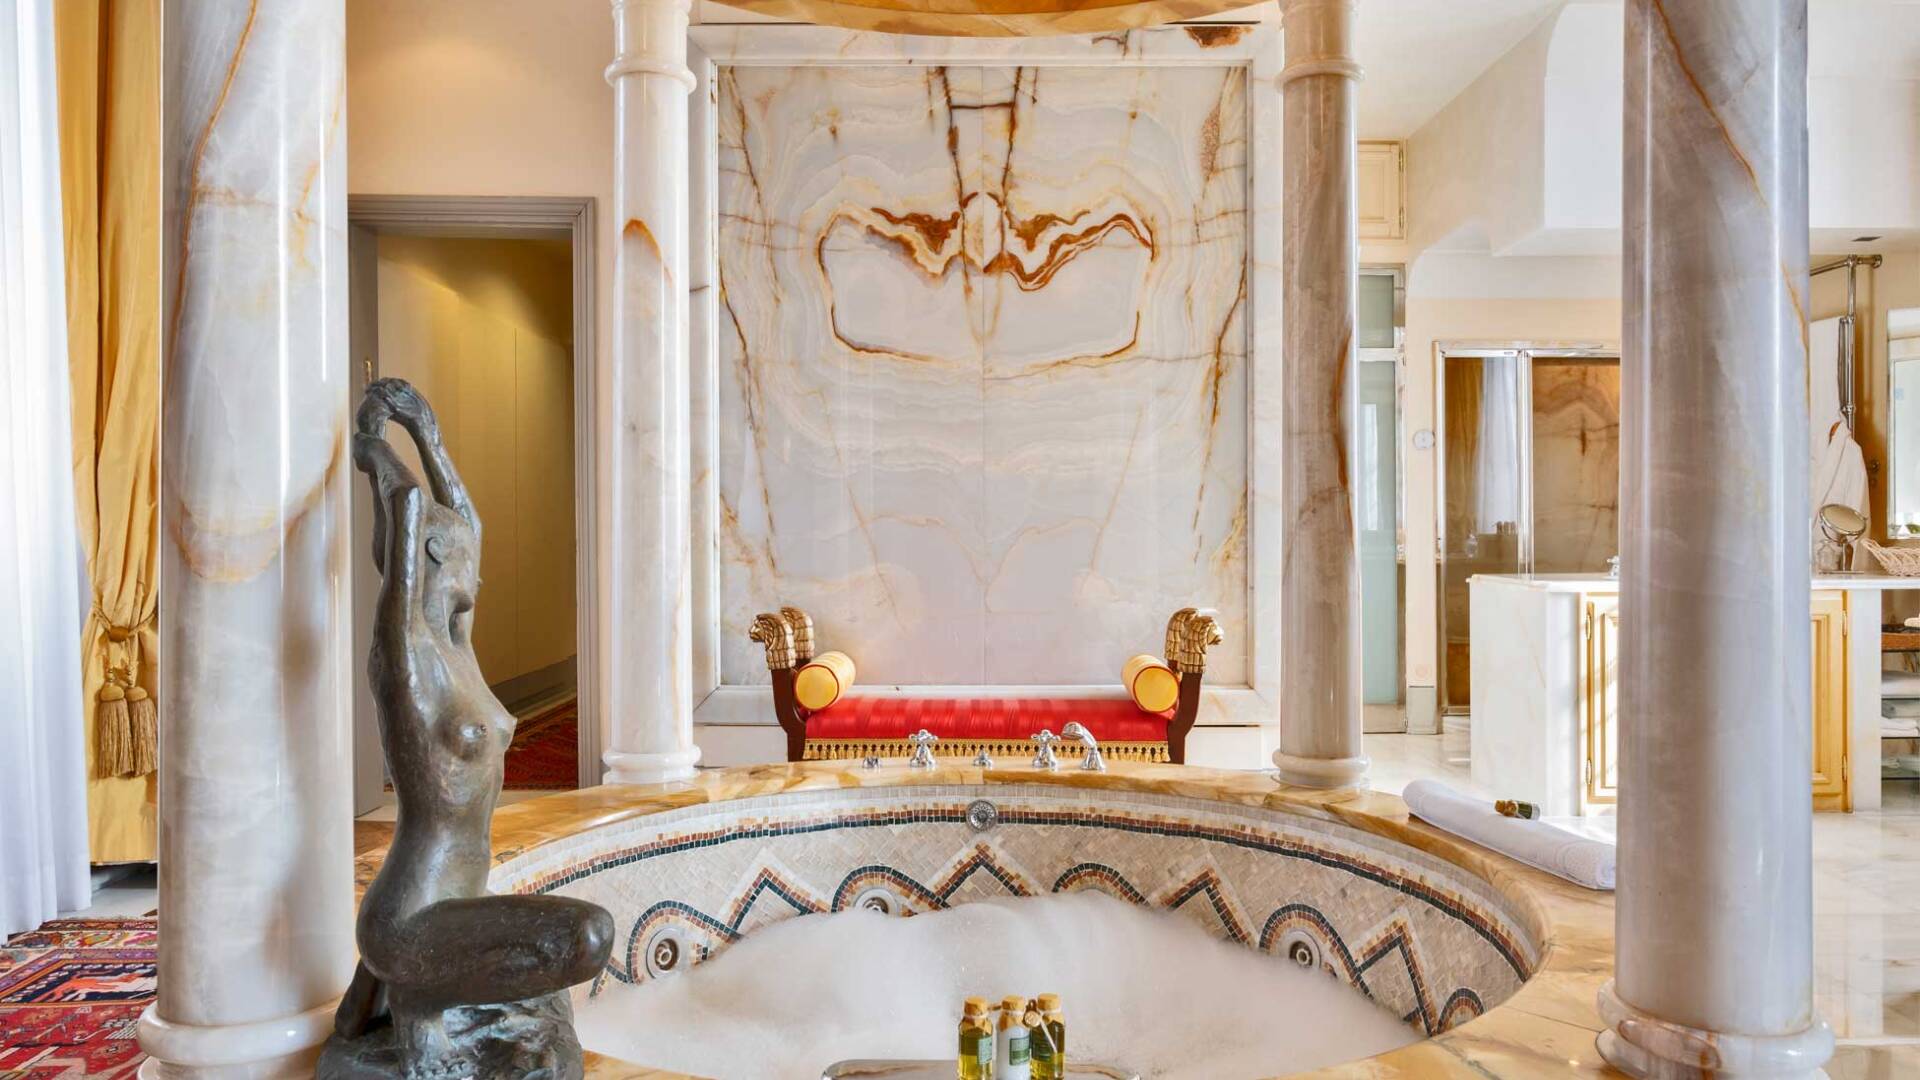 refined bath tub with golden details